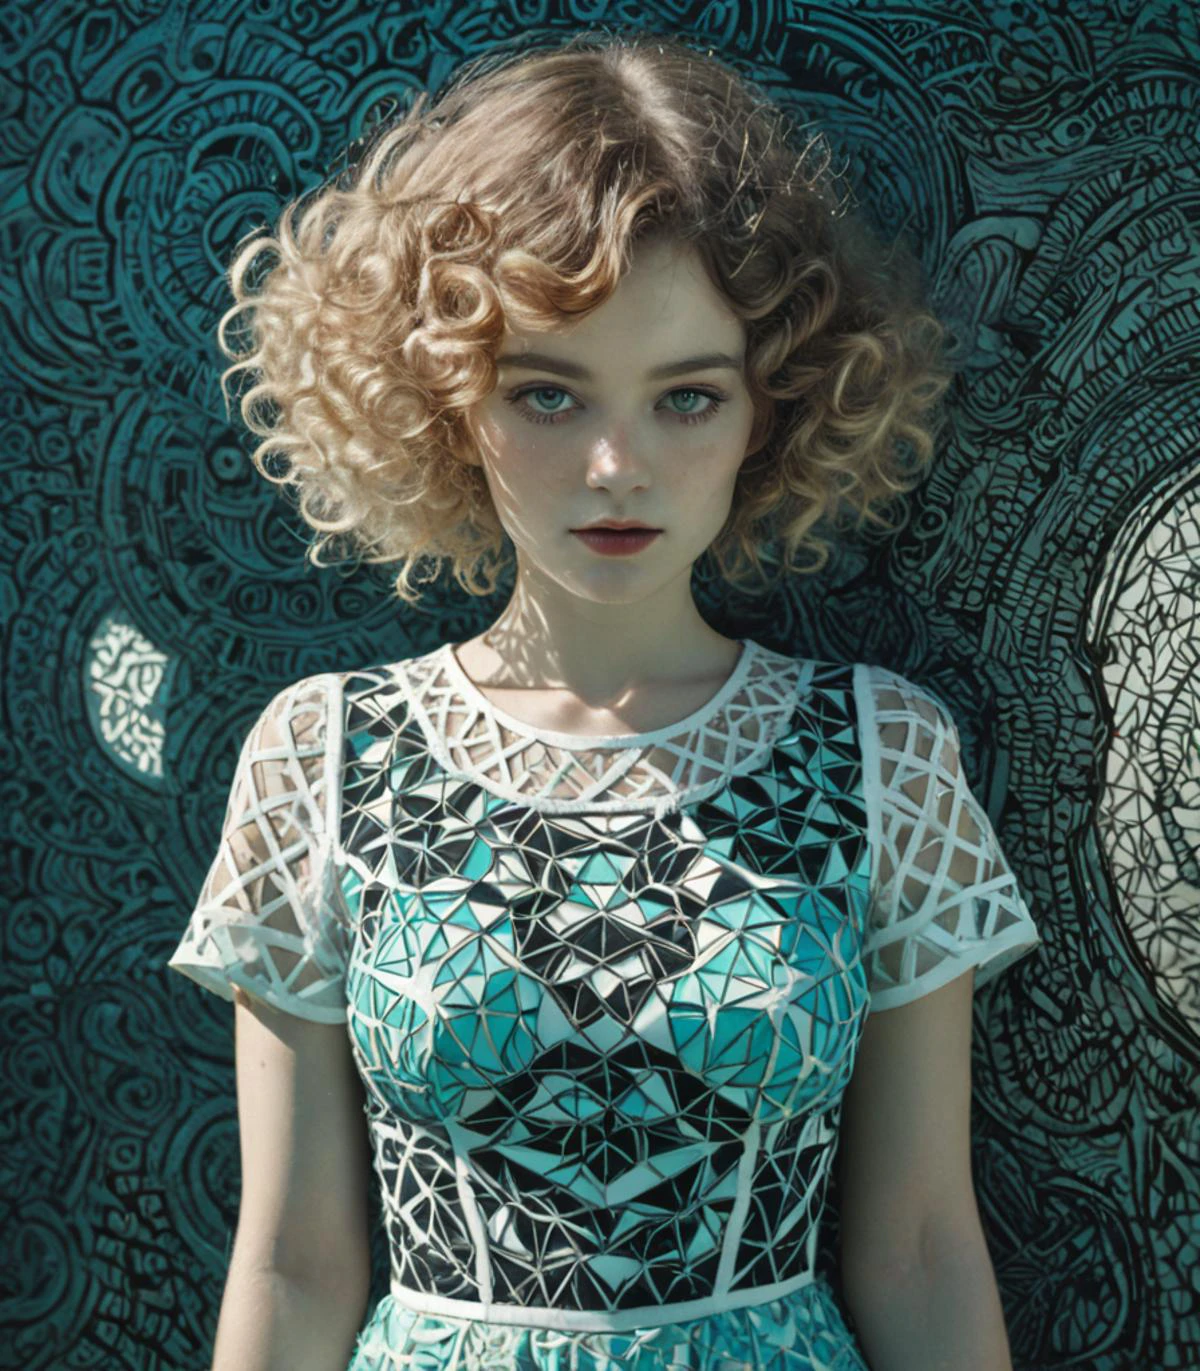 Velvia, Realism, graphic print, surreal, klimt,Breakcore, Sunlight, Reflected light, Berlin Secession, delicate, Hellenistic hair styled as French crop, Zentangle, anaglyph effect, elegant dress, face portrait